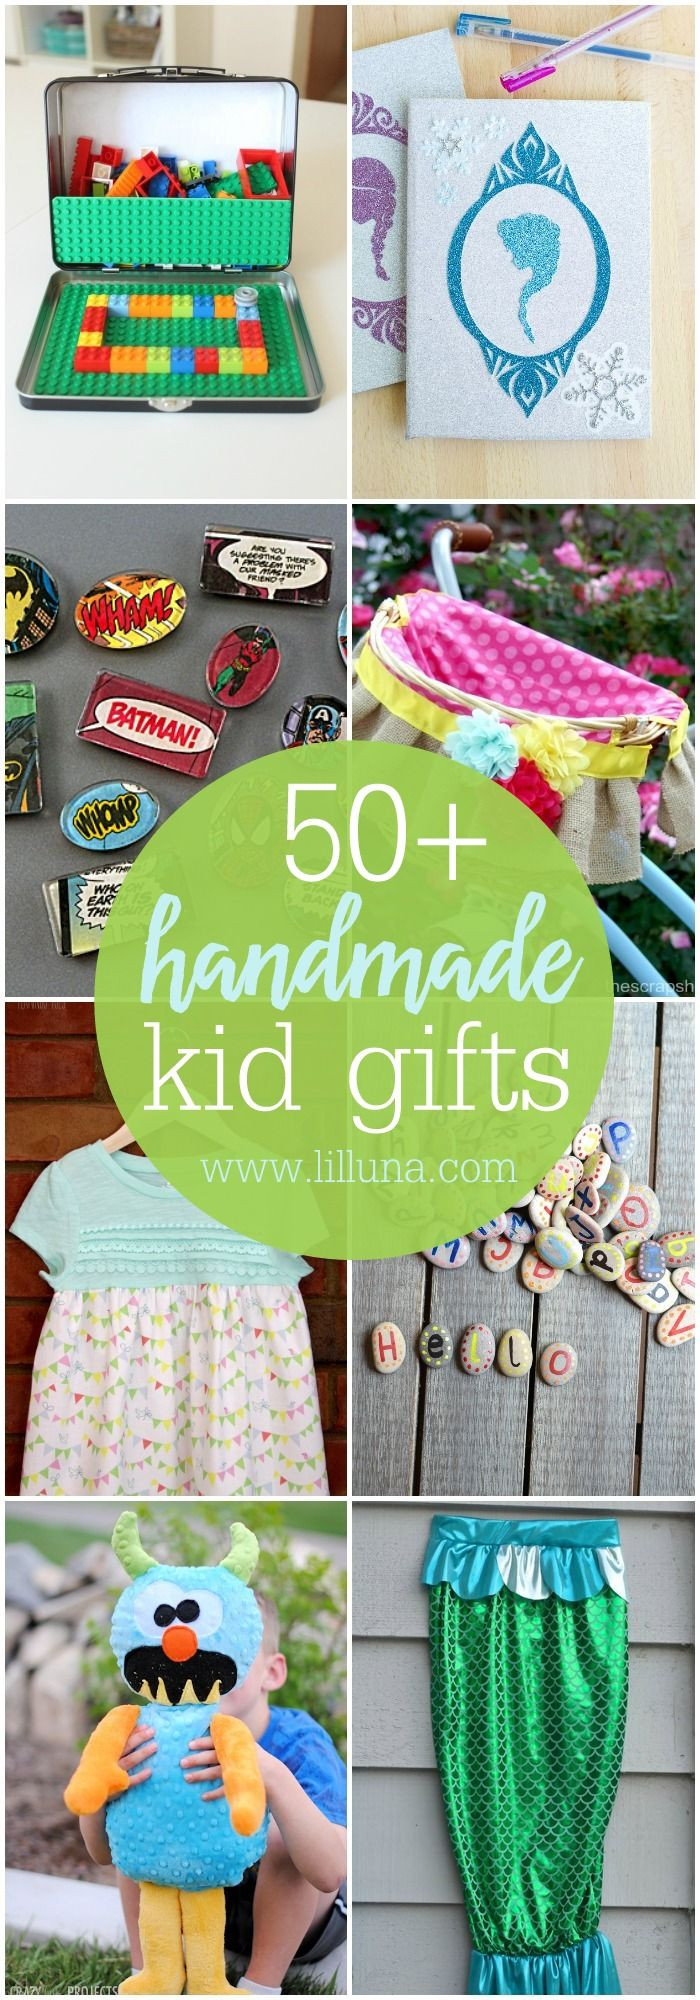 Unique Gifts For Kids
 50 Handmade Gift ideas for Kids so many great ideas to